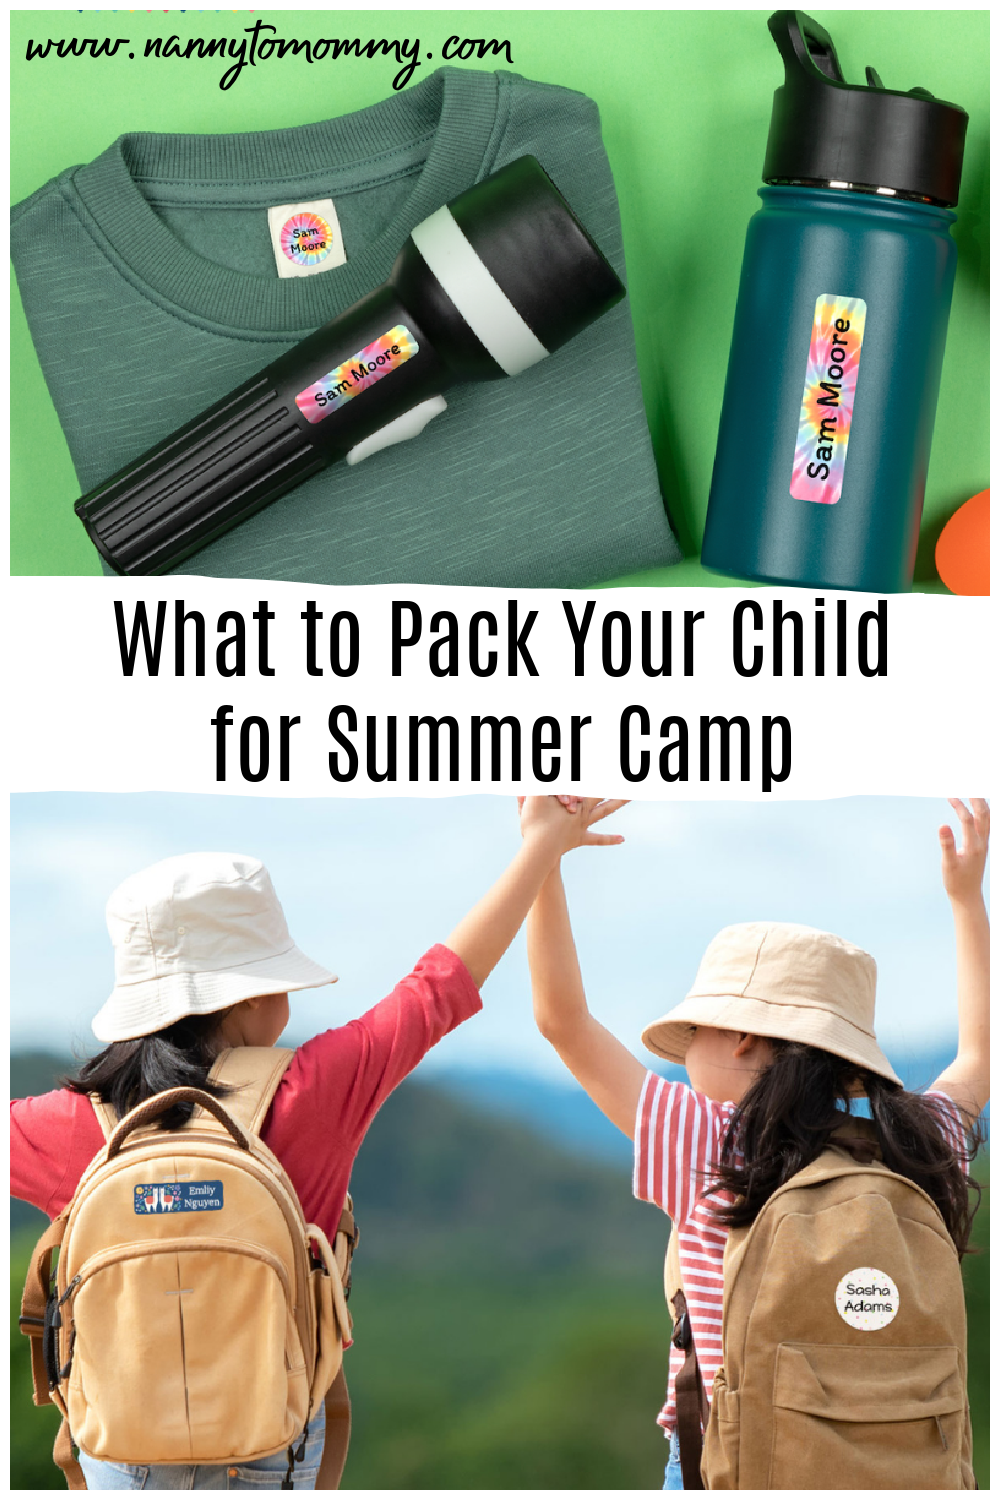 What to Pack Your Child for Summer Camp